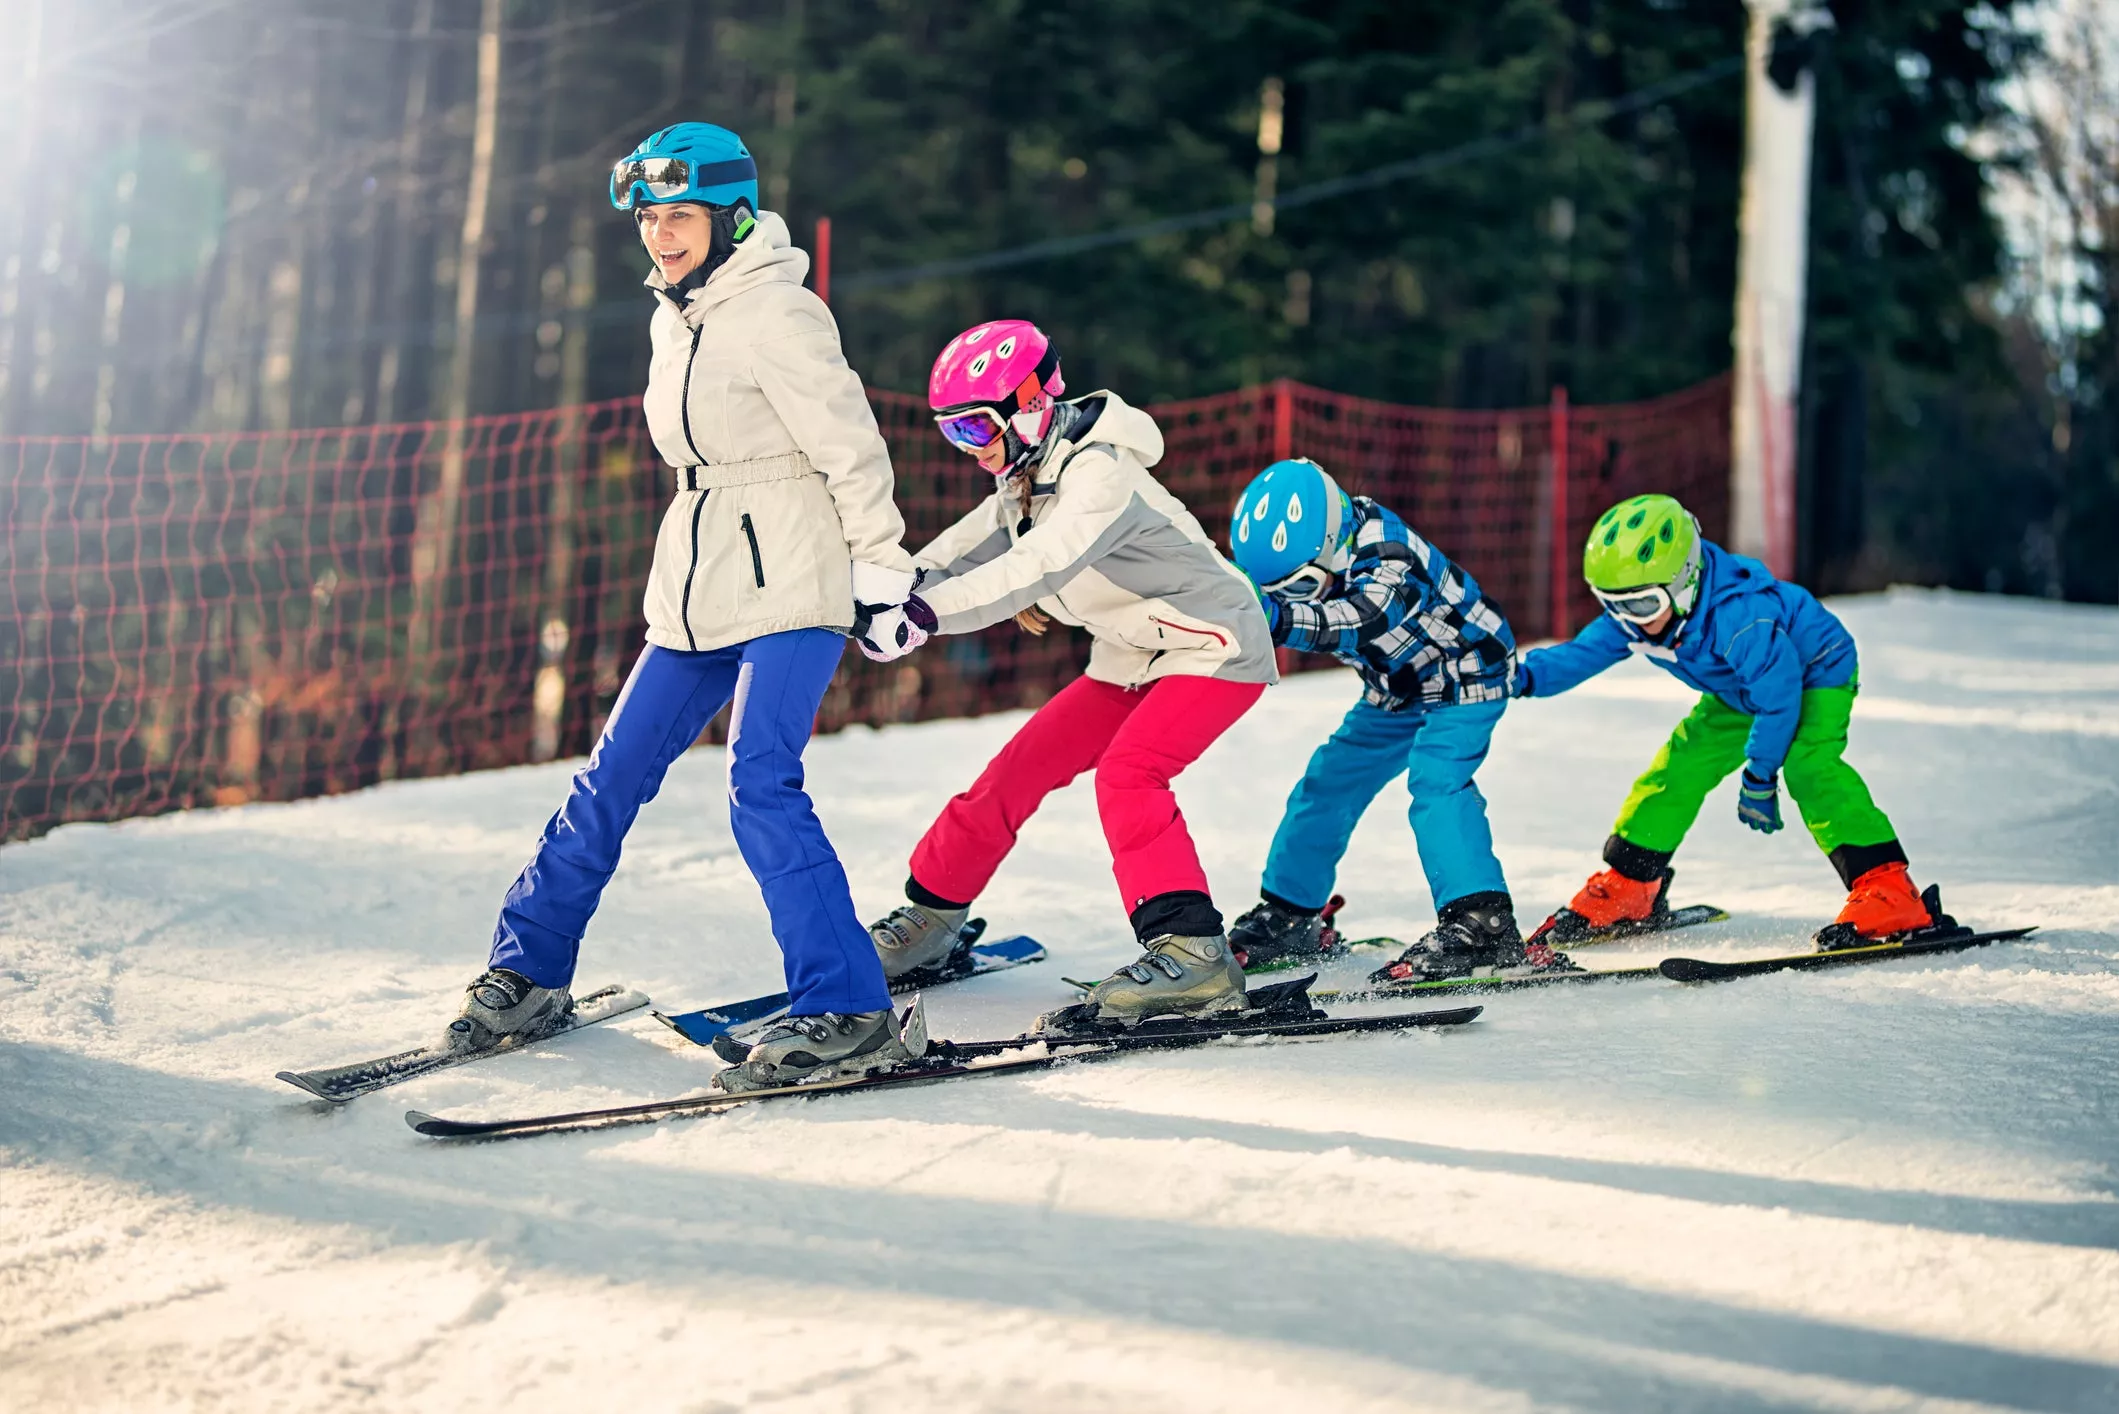 Beaver Creek Ski & Snowboard Lessons in USA, North America | Snowboarding,Skiing - Rated 3.6